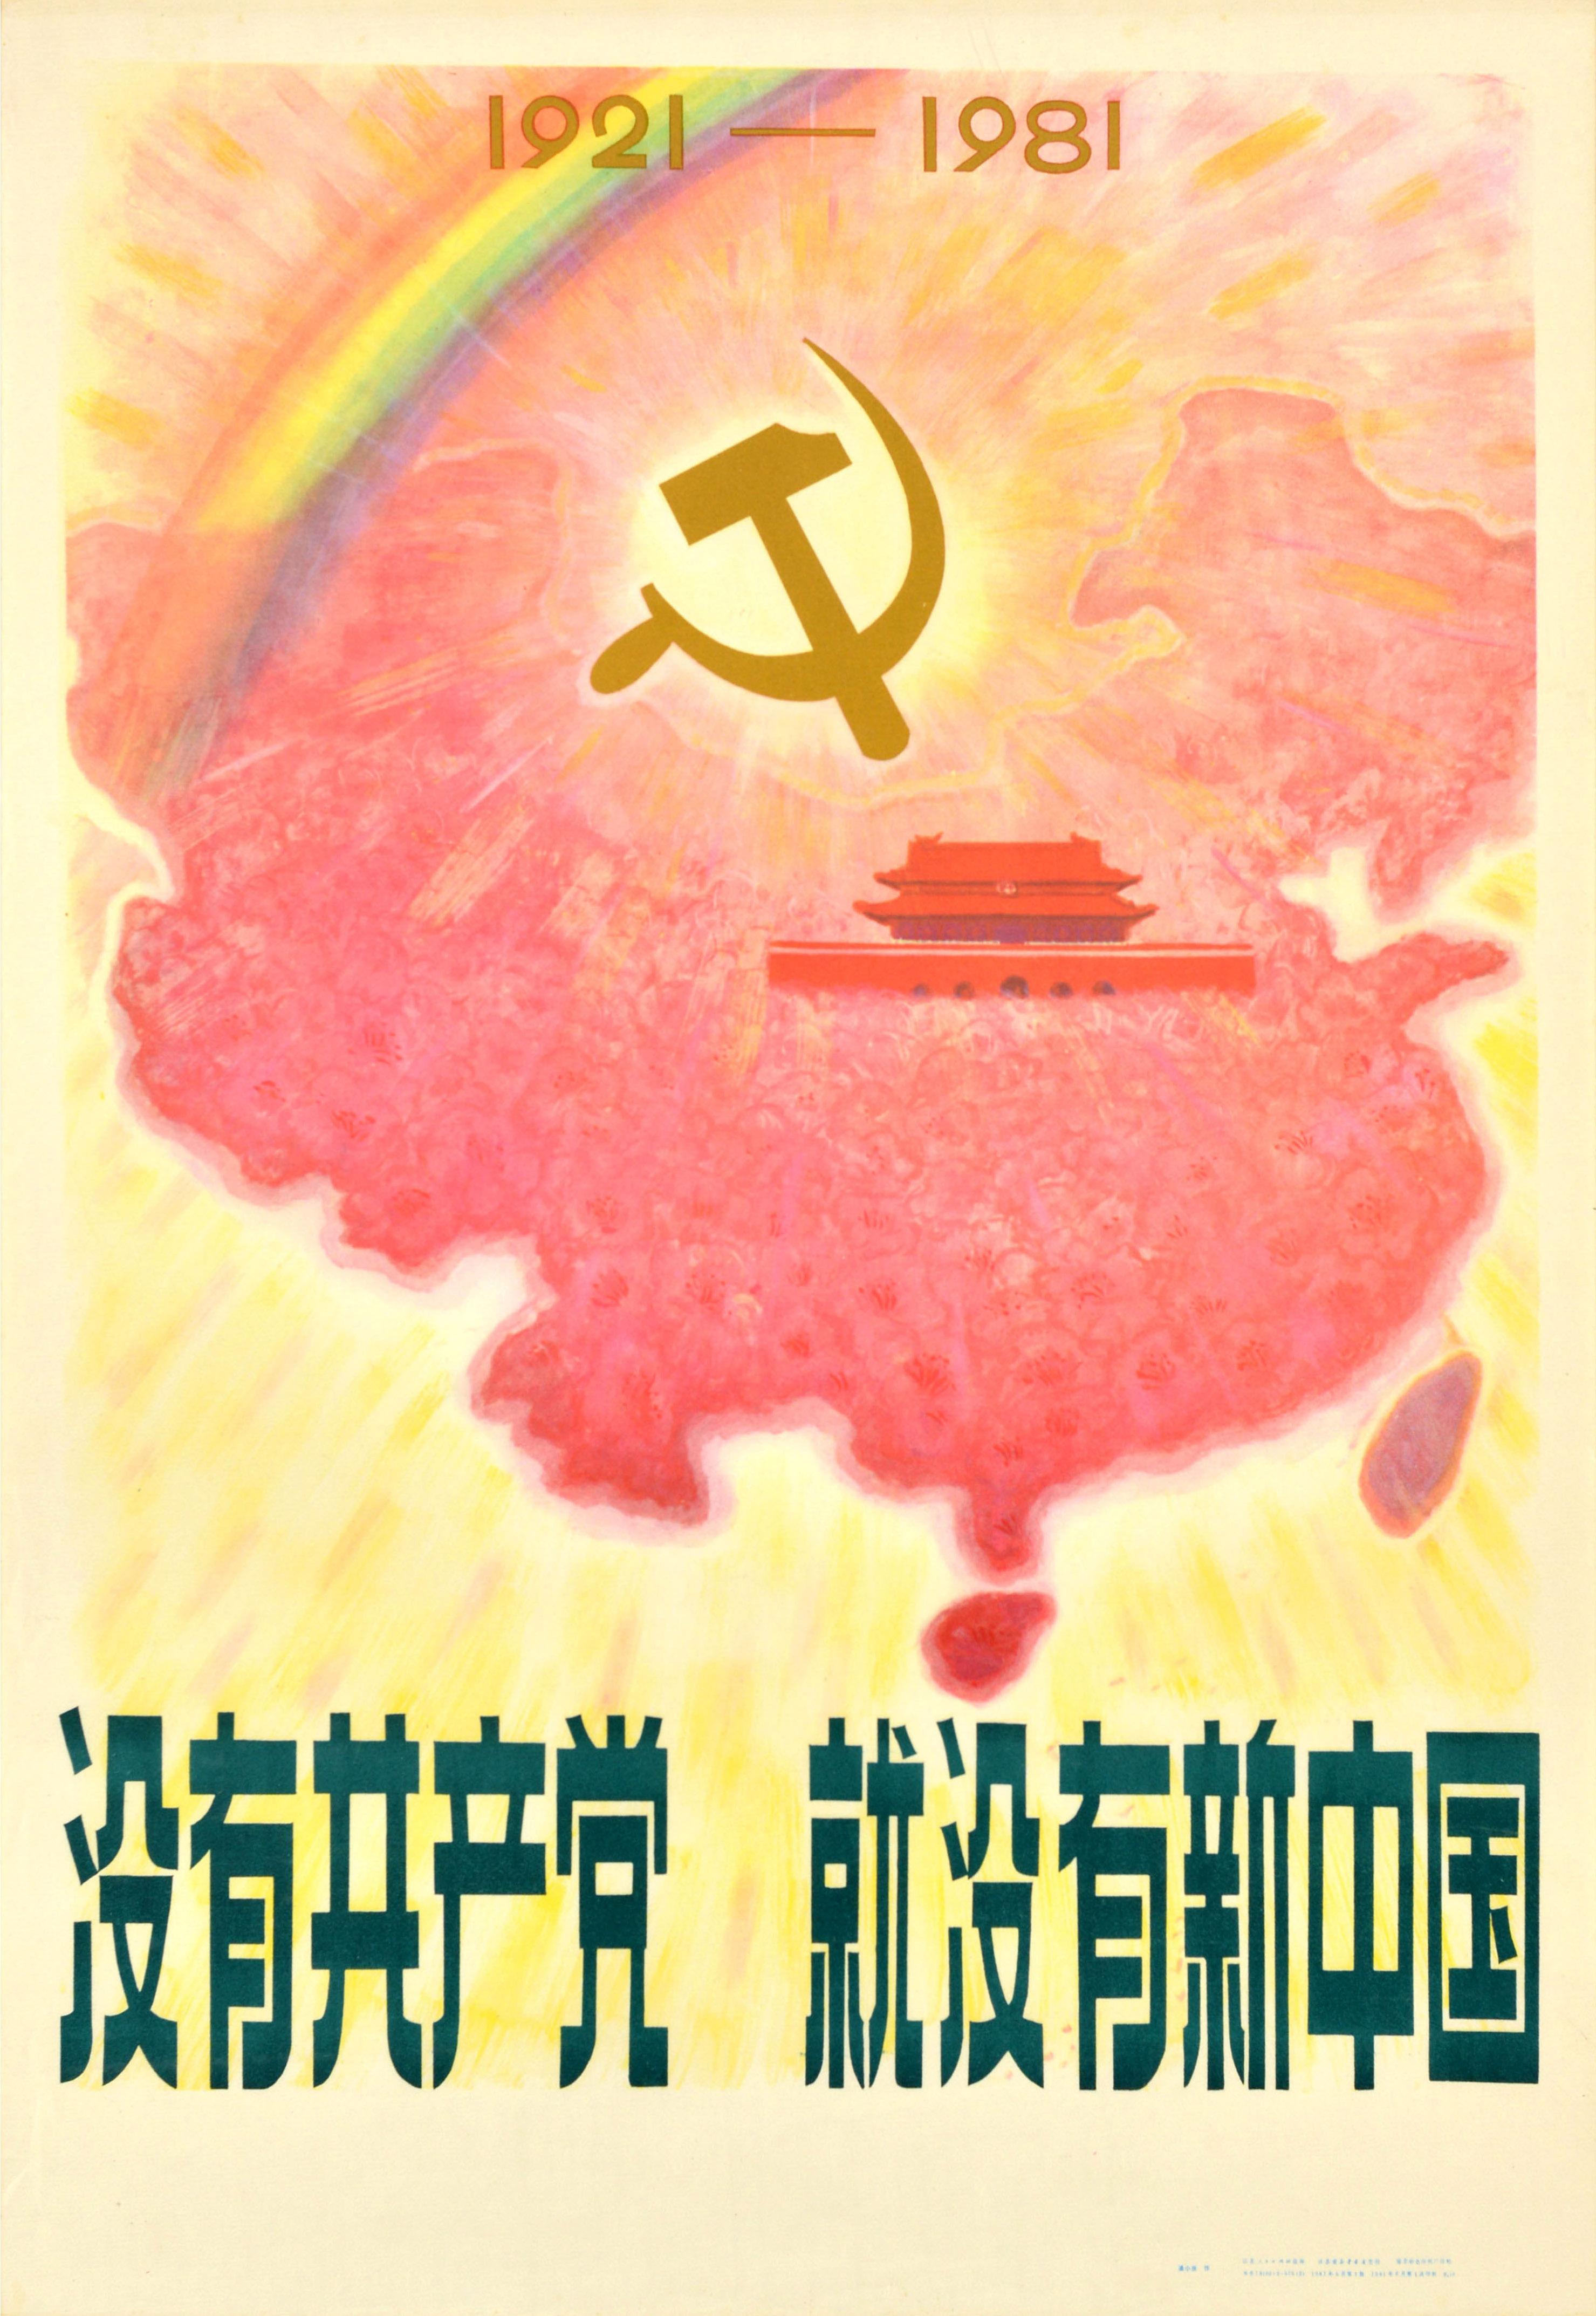 Unknown Print - Original Vintage Chinese Communist Party Propaganda Poster New China Map Beijing